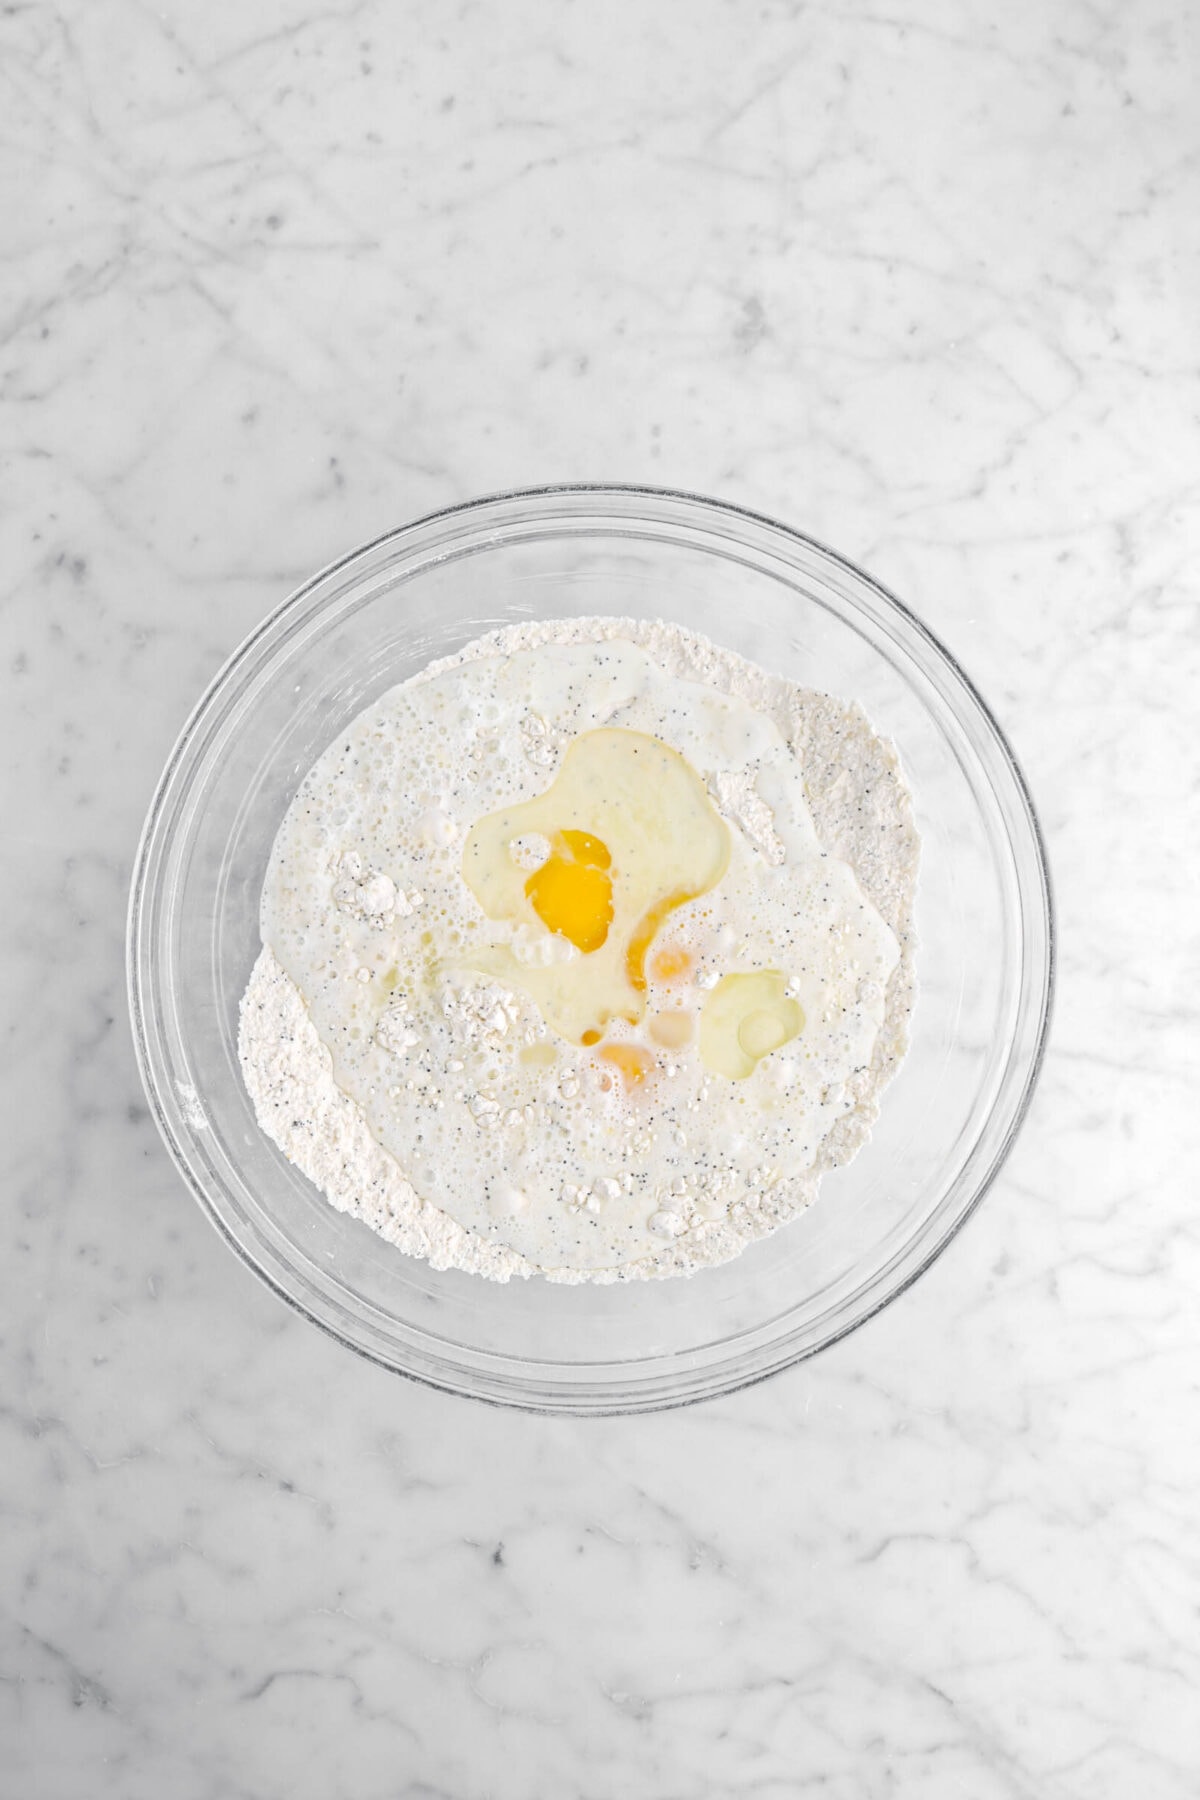 milk, eggs, and oil added to dry ingredients.